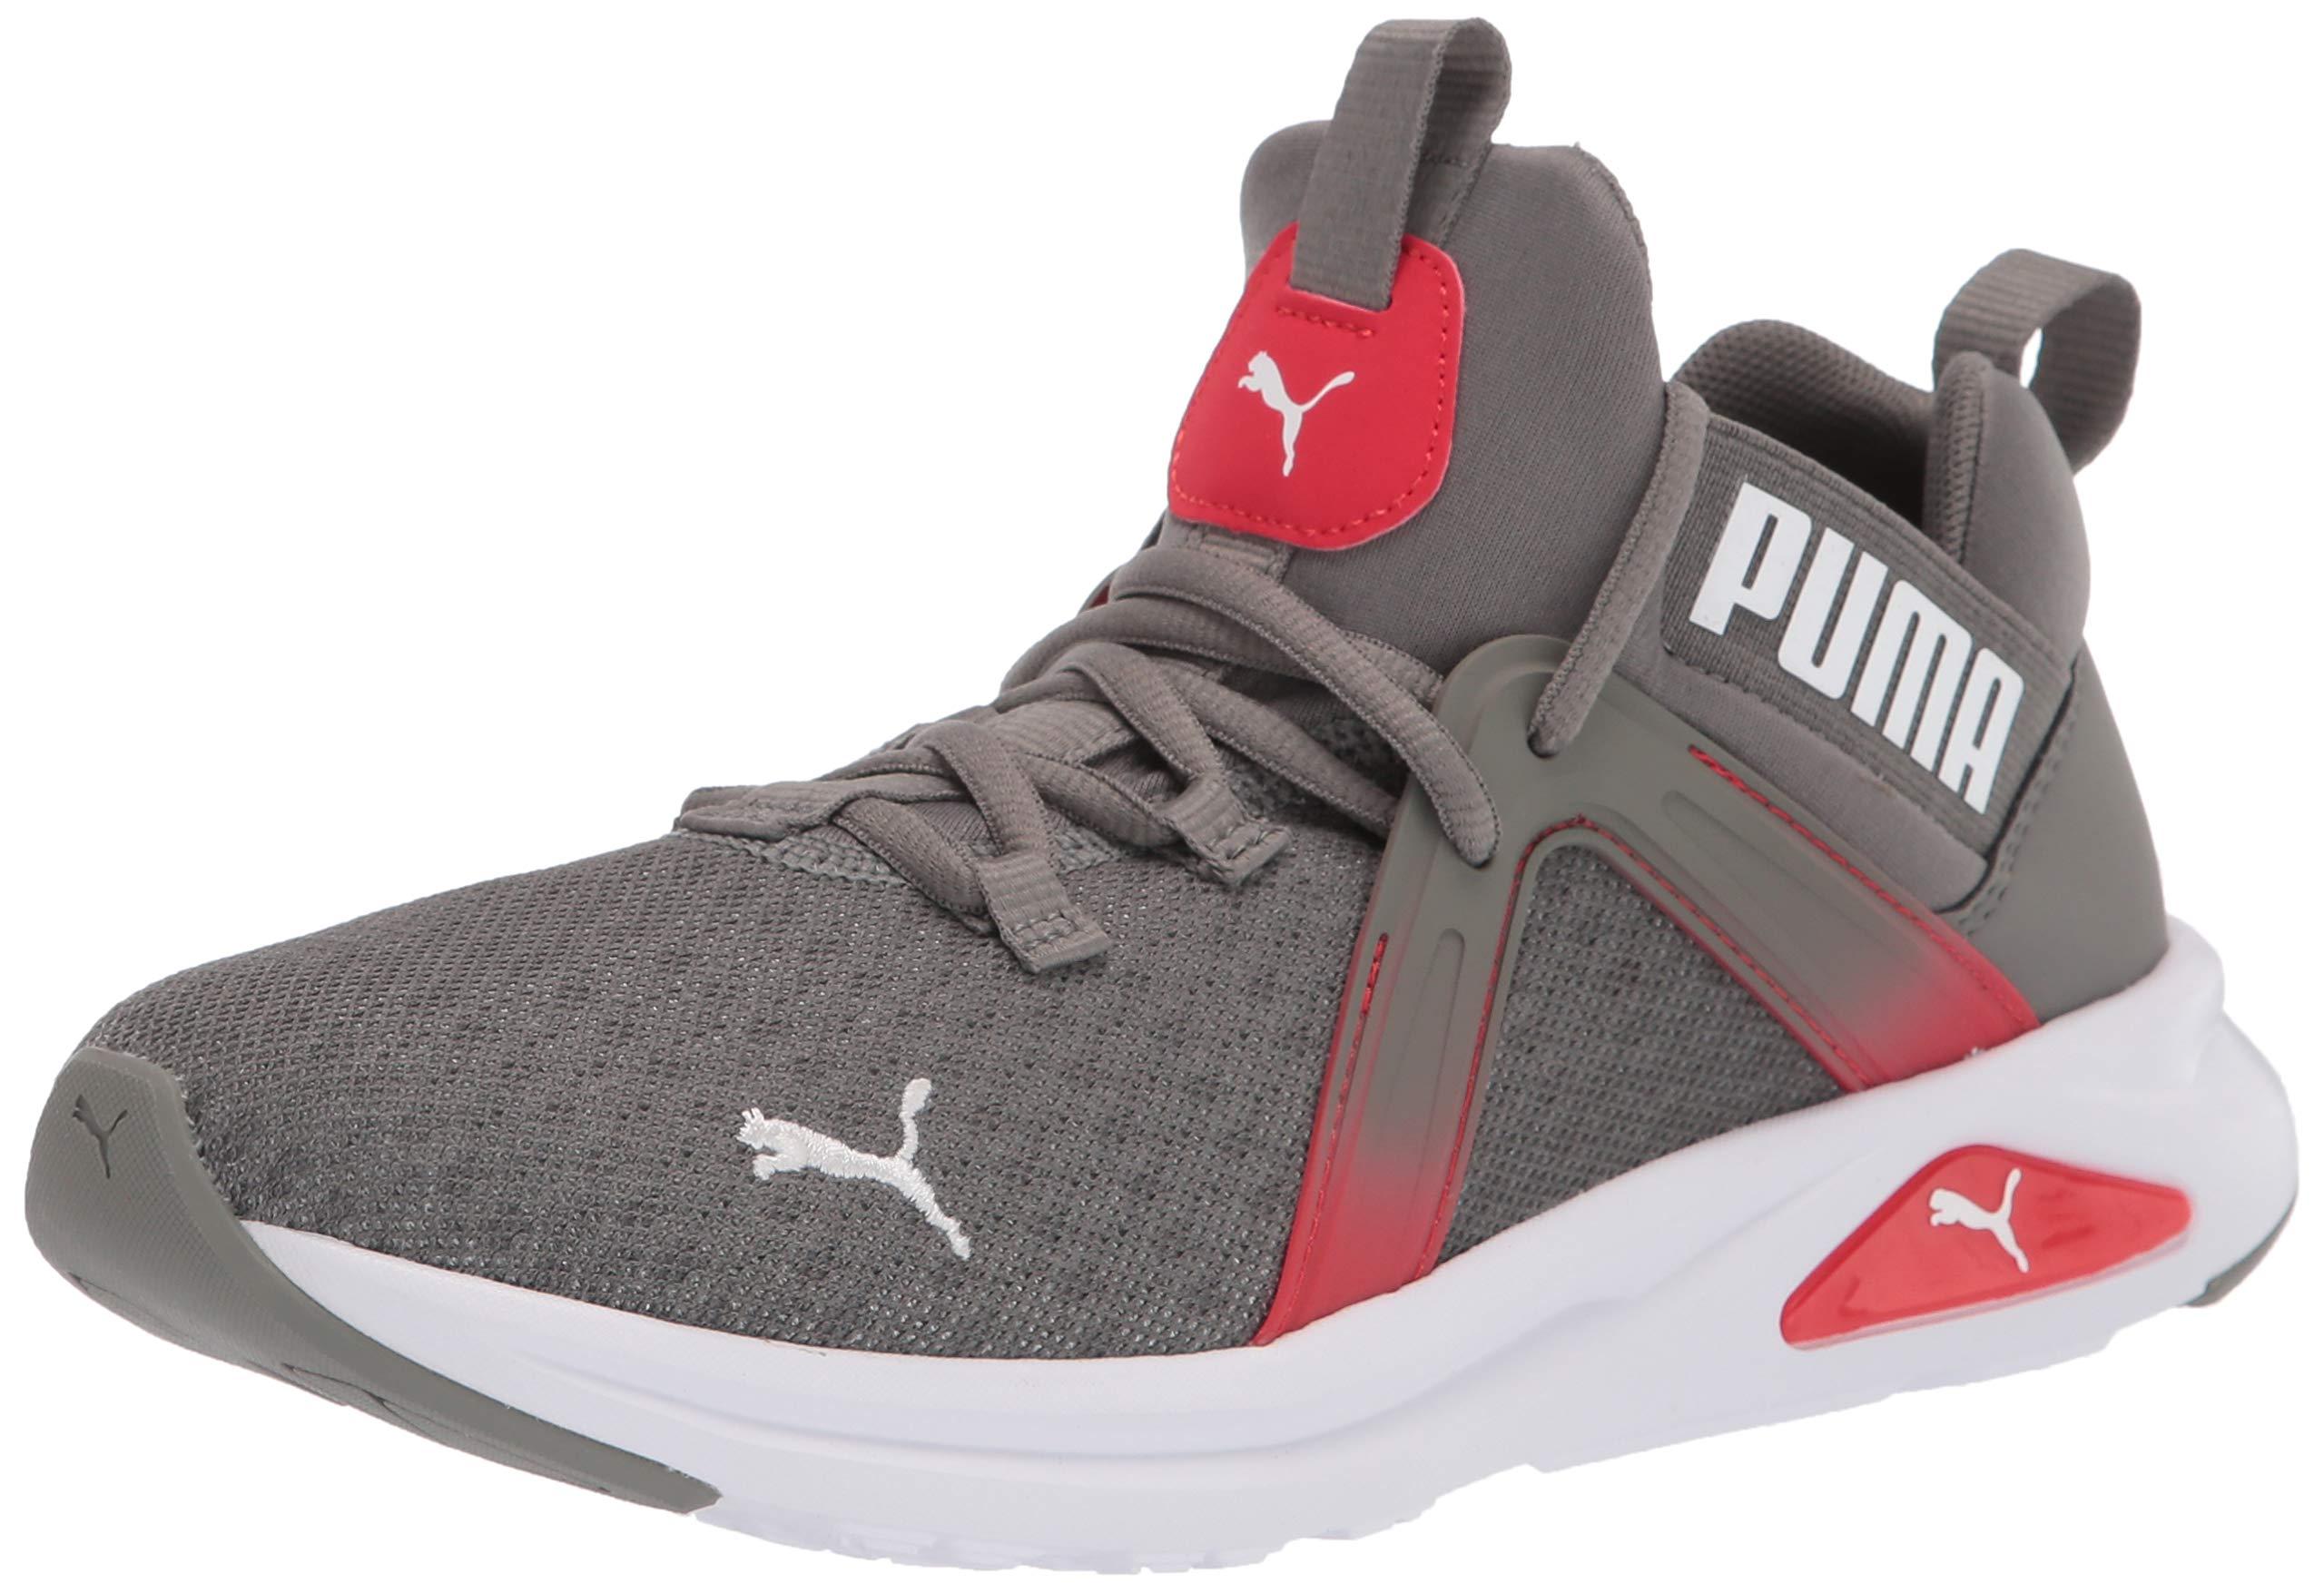 PUMA Rubber Enzo 2 in Black/White (Red) for Men - Save 49% - Lyst